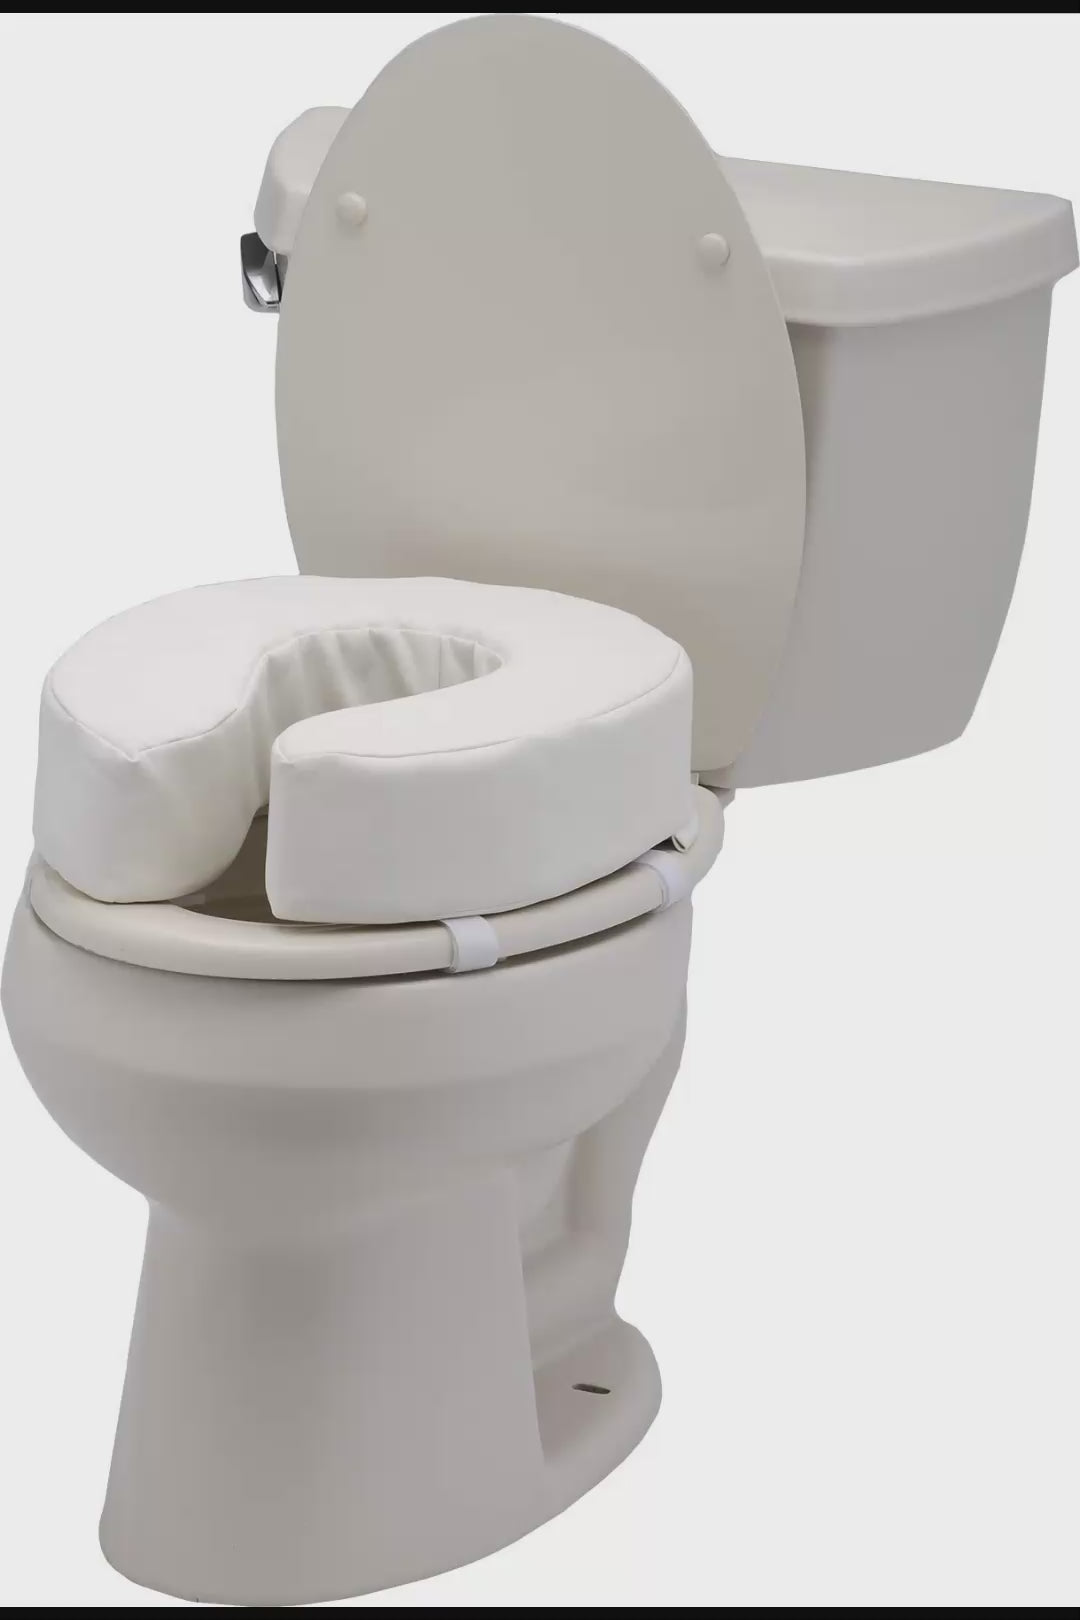 video of how to use the foam seat on the toilet